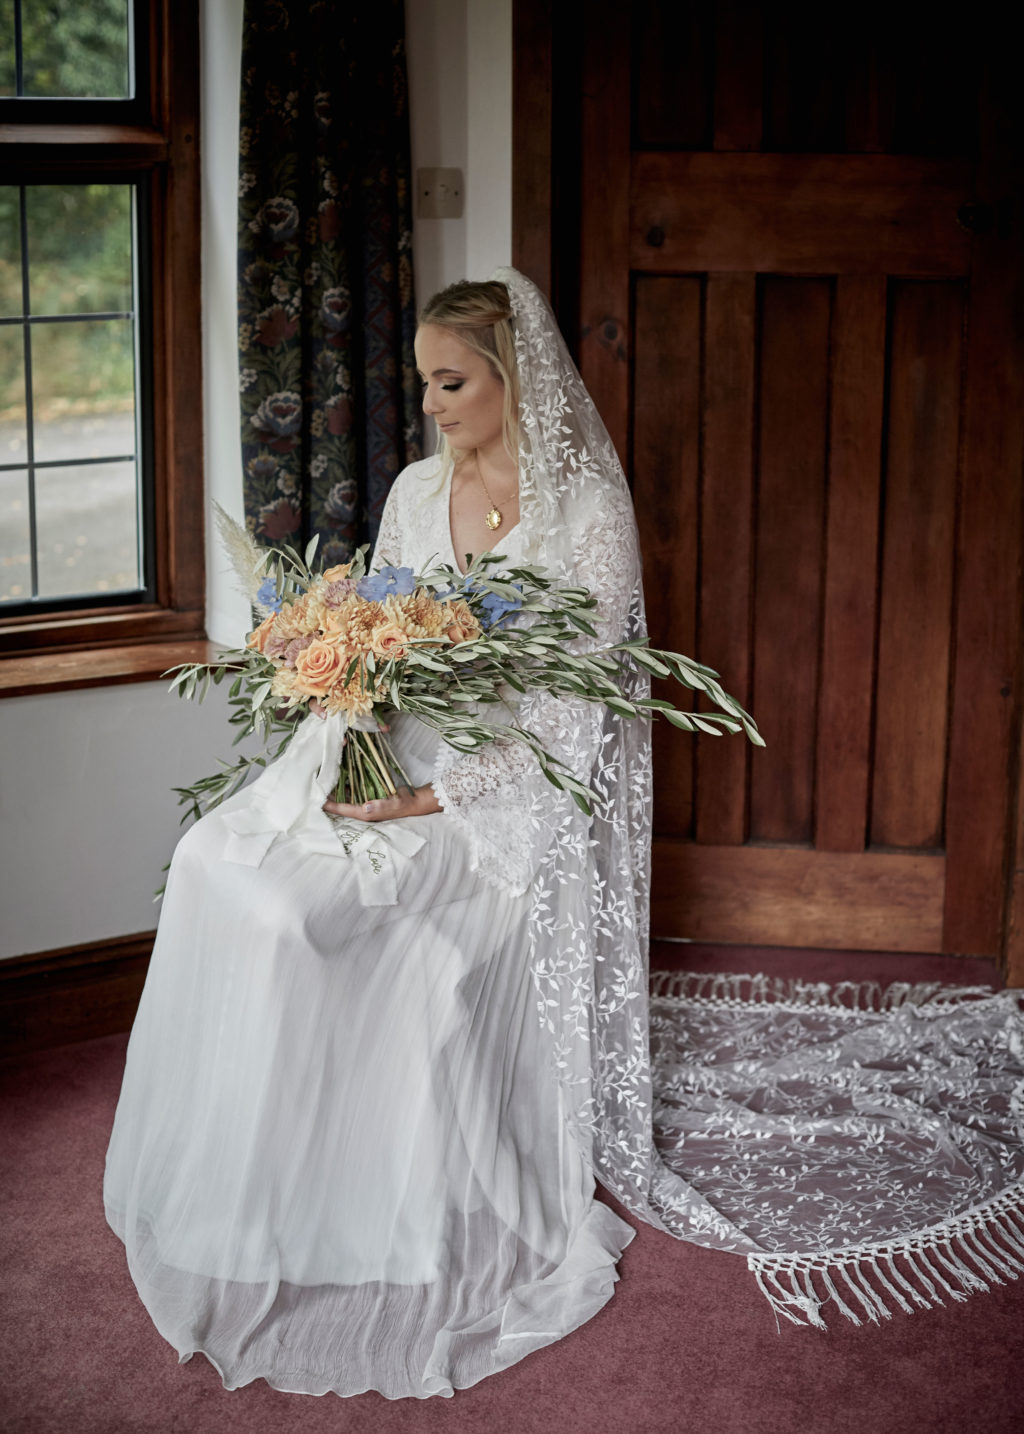 Luxe 1970's Inspired Wedding at Bysshe Court Barn Surrey